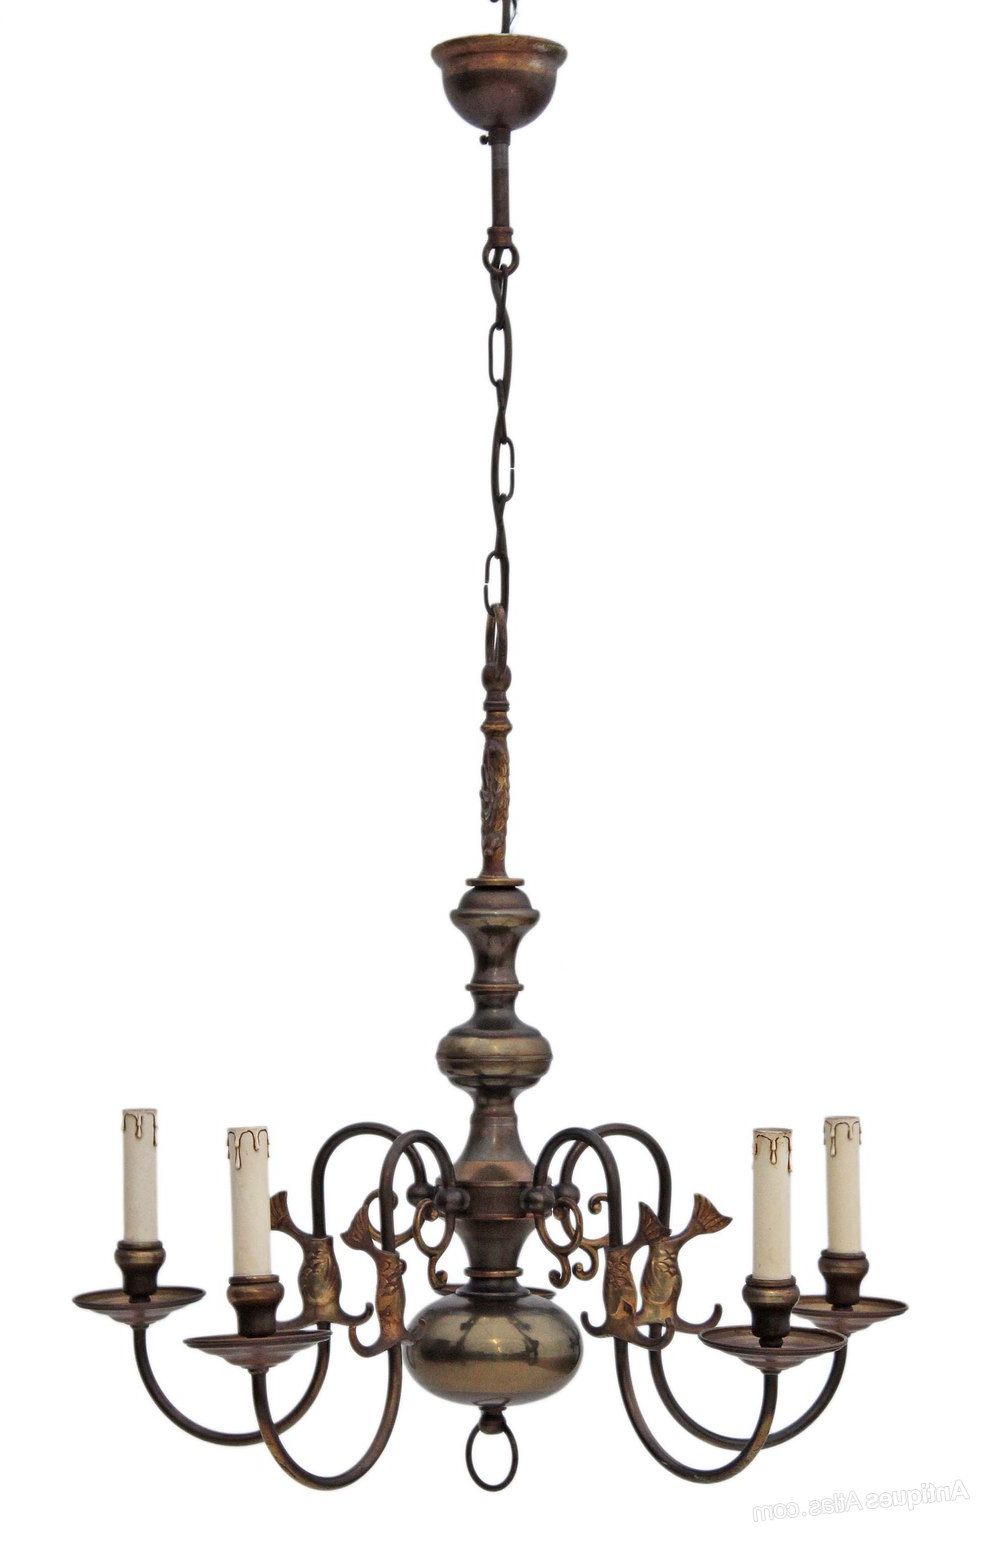 Old Bronze Five Light Chandeliers Throughout Well Known Antiques Atlas – Flemish 5 Lamp Brass Bronze Chandelier (View 6 of 20)